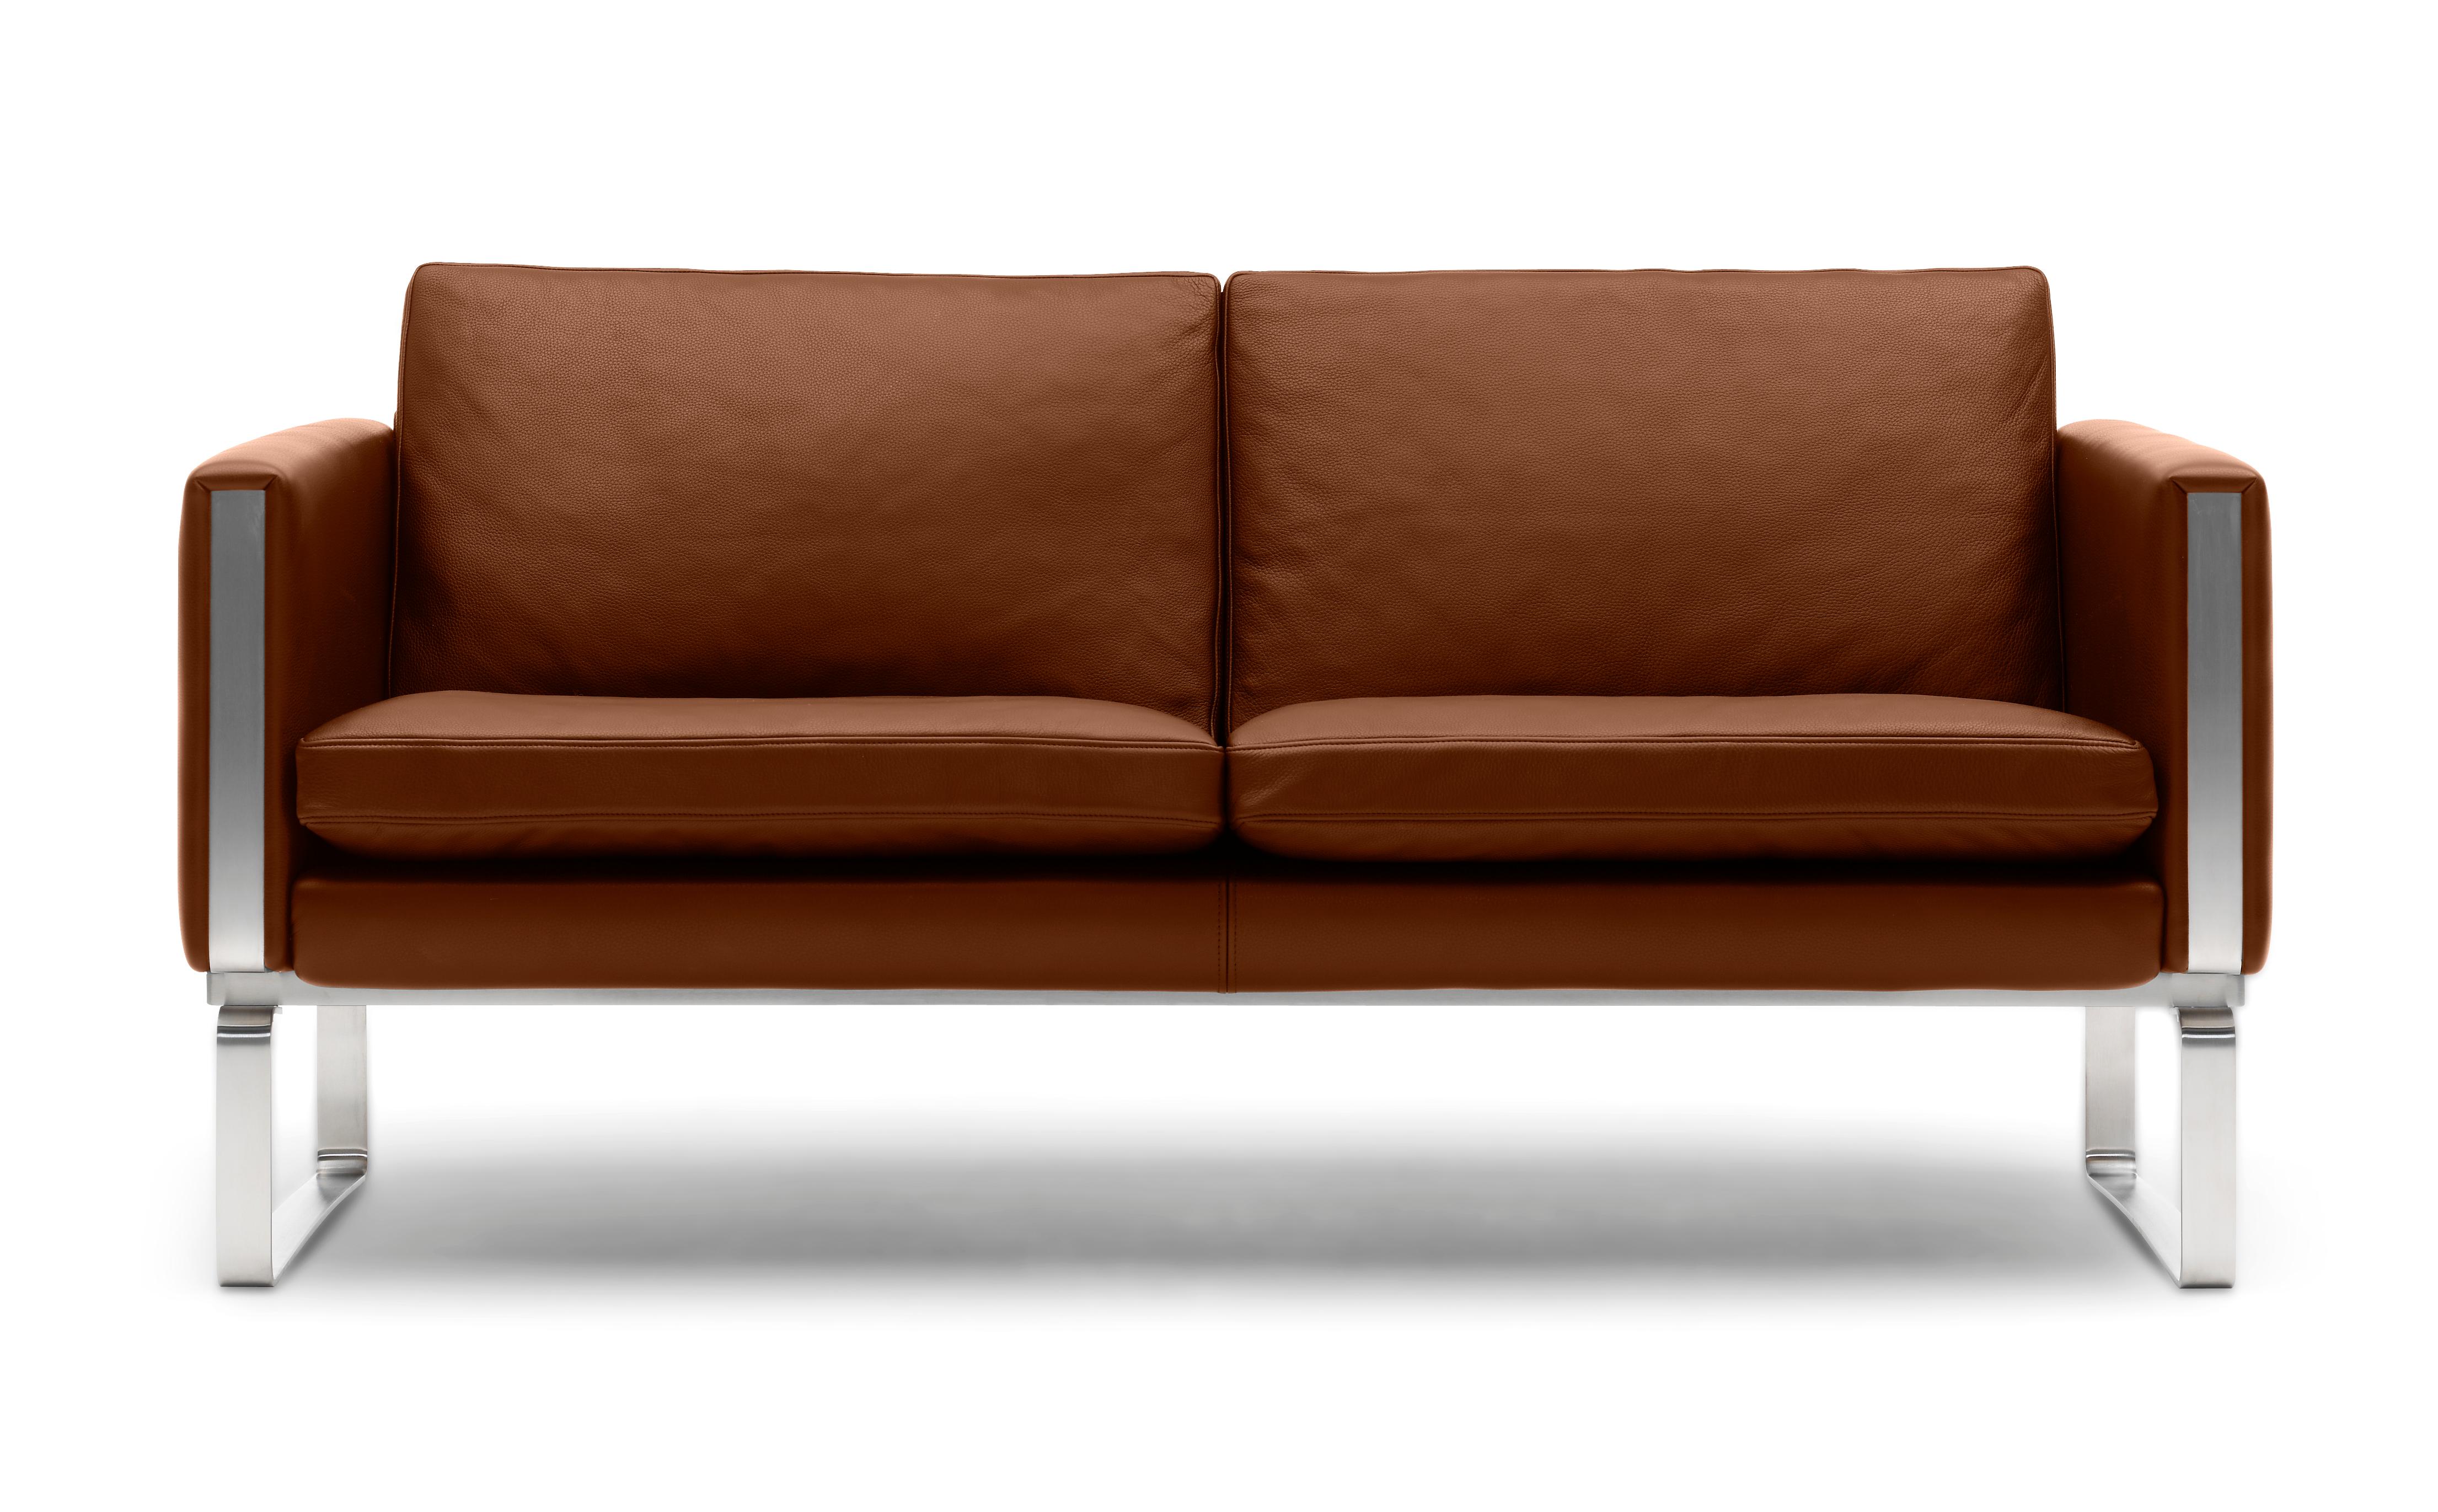 Brown (Thor 307) CH102 2-Seat Sofa in Stainless Steel Frame with Leather Seat by Hans J. Wegner